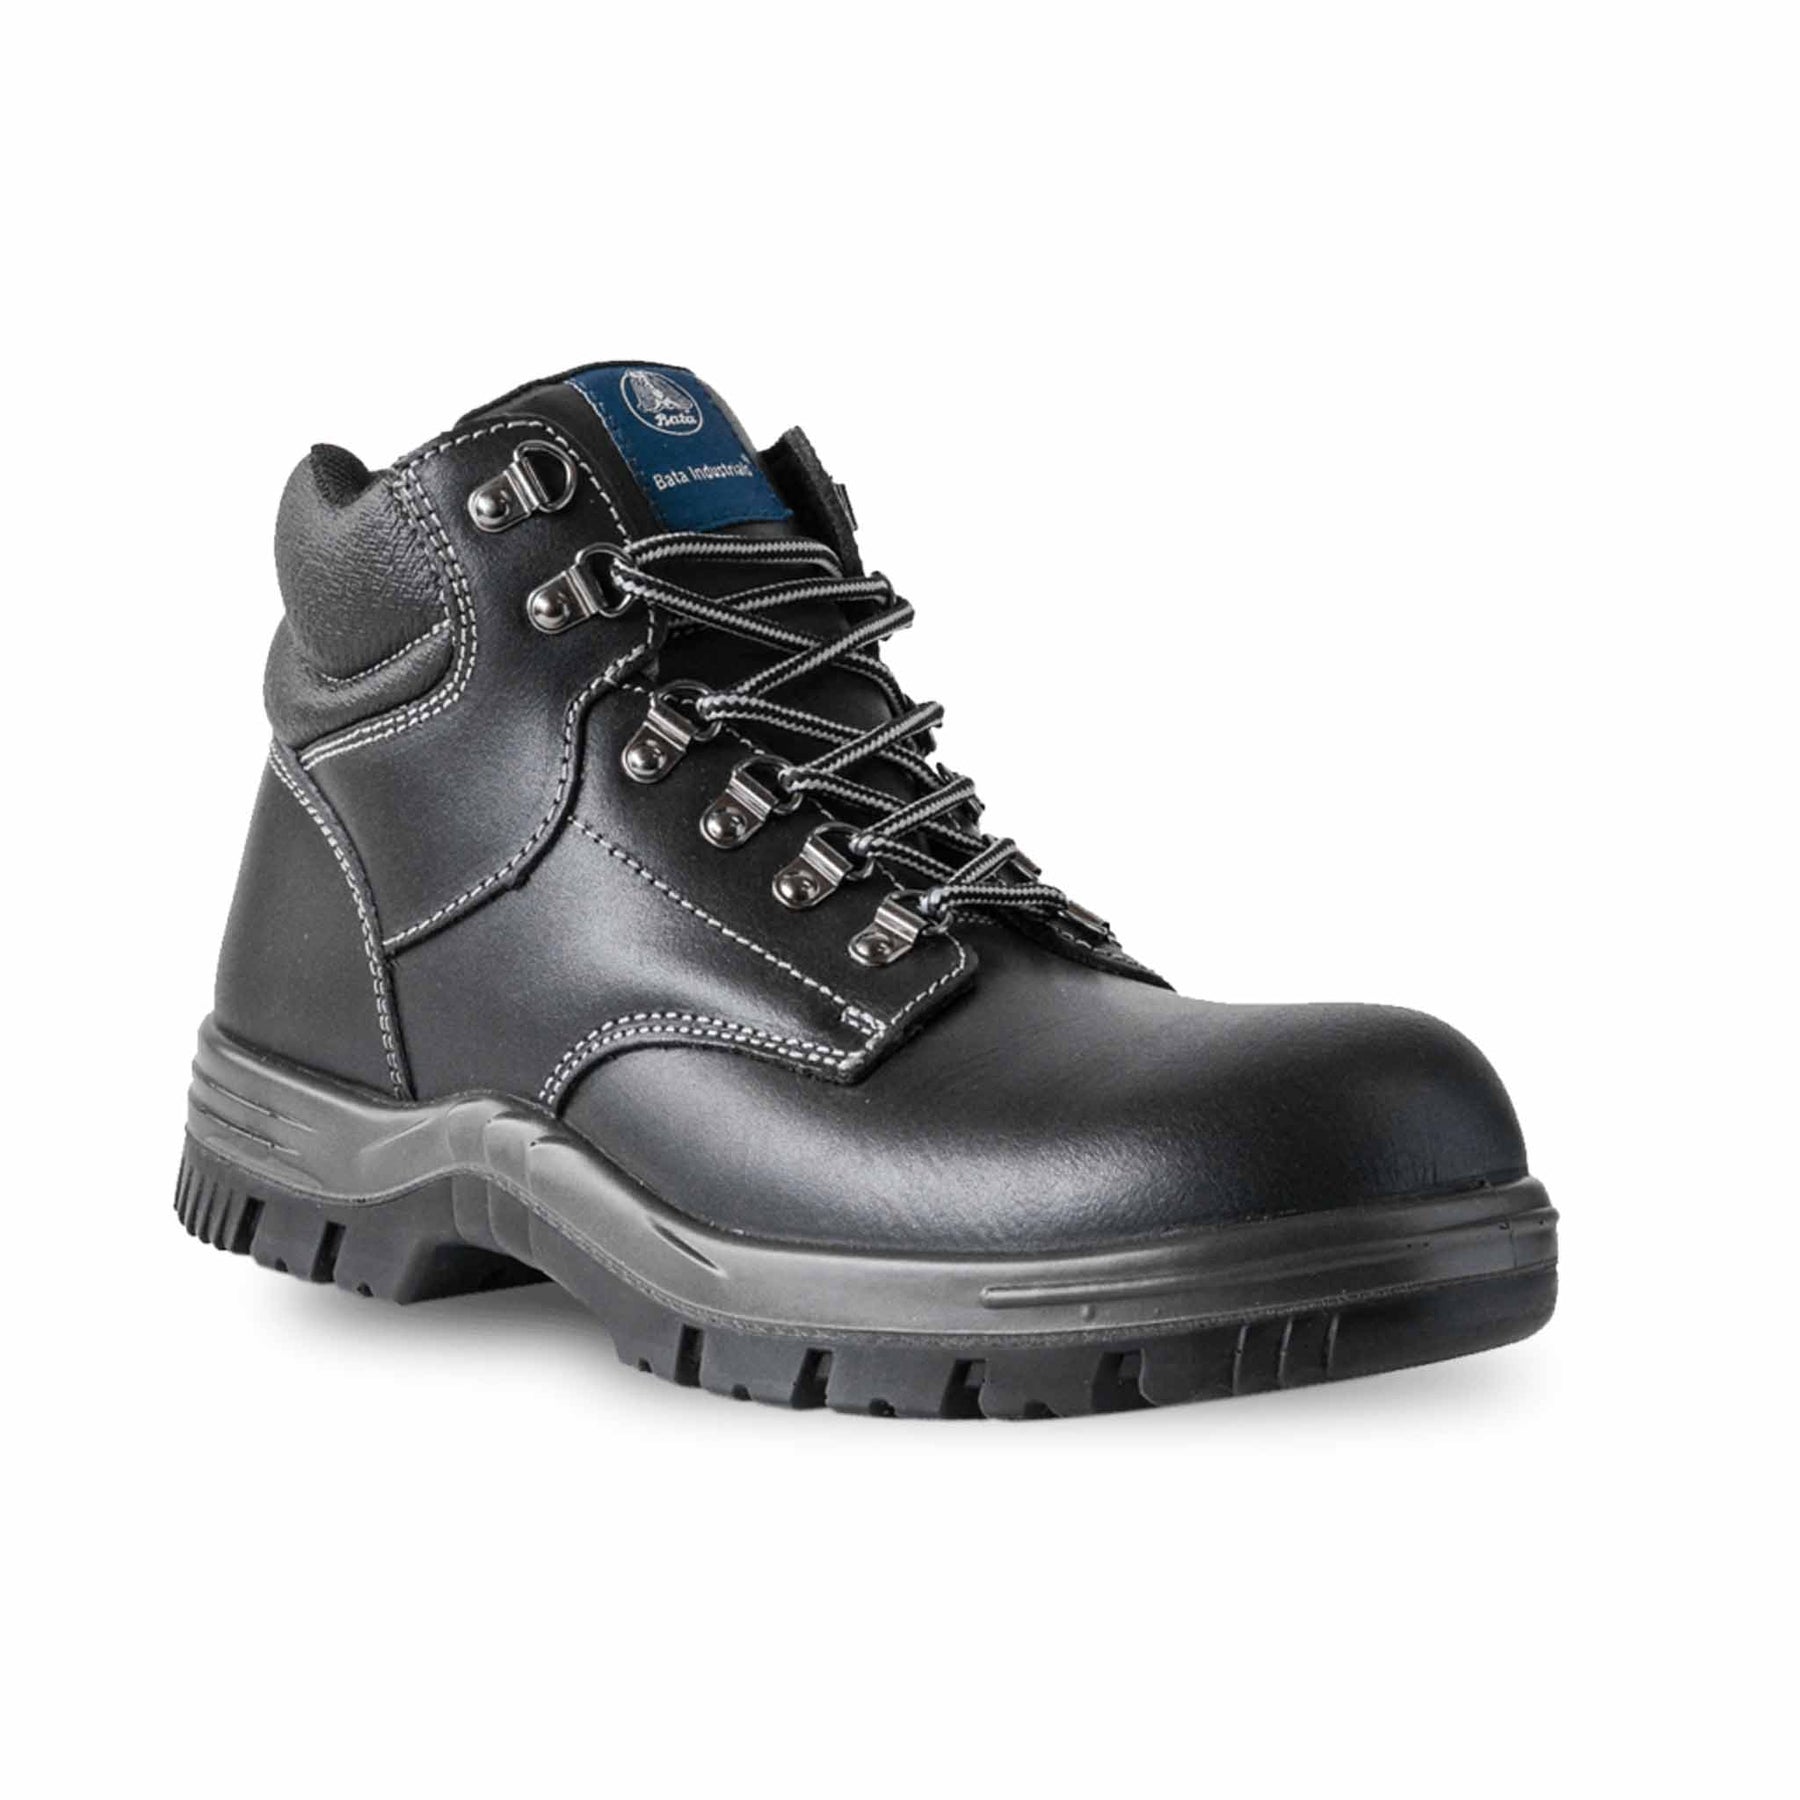 black lace up safety work boot